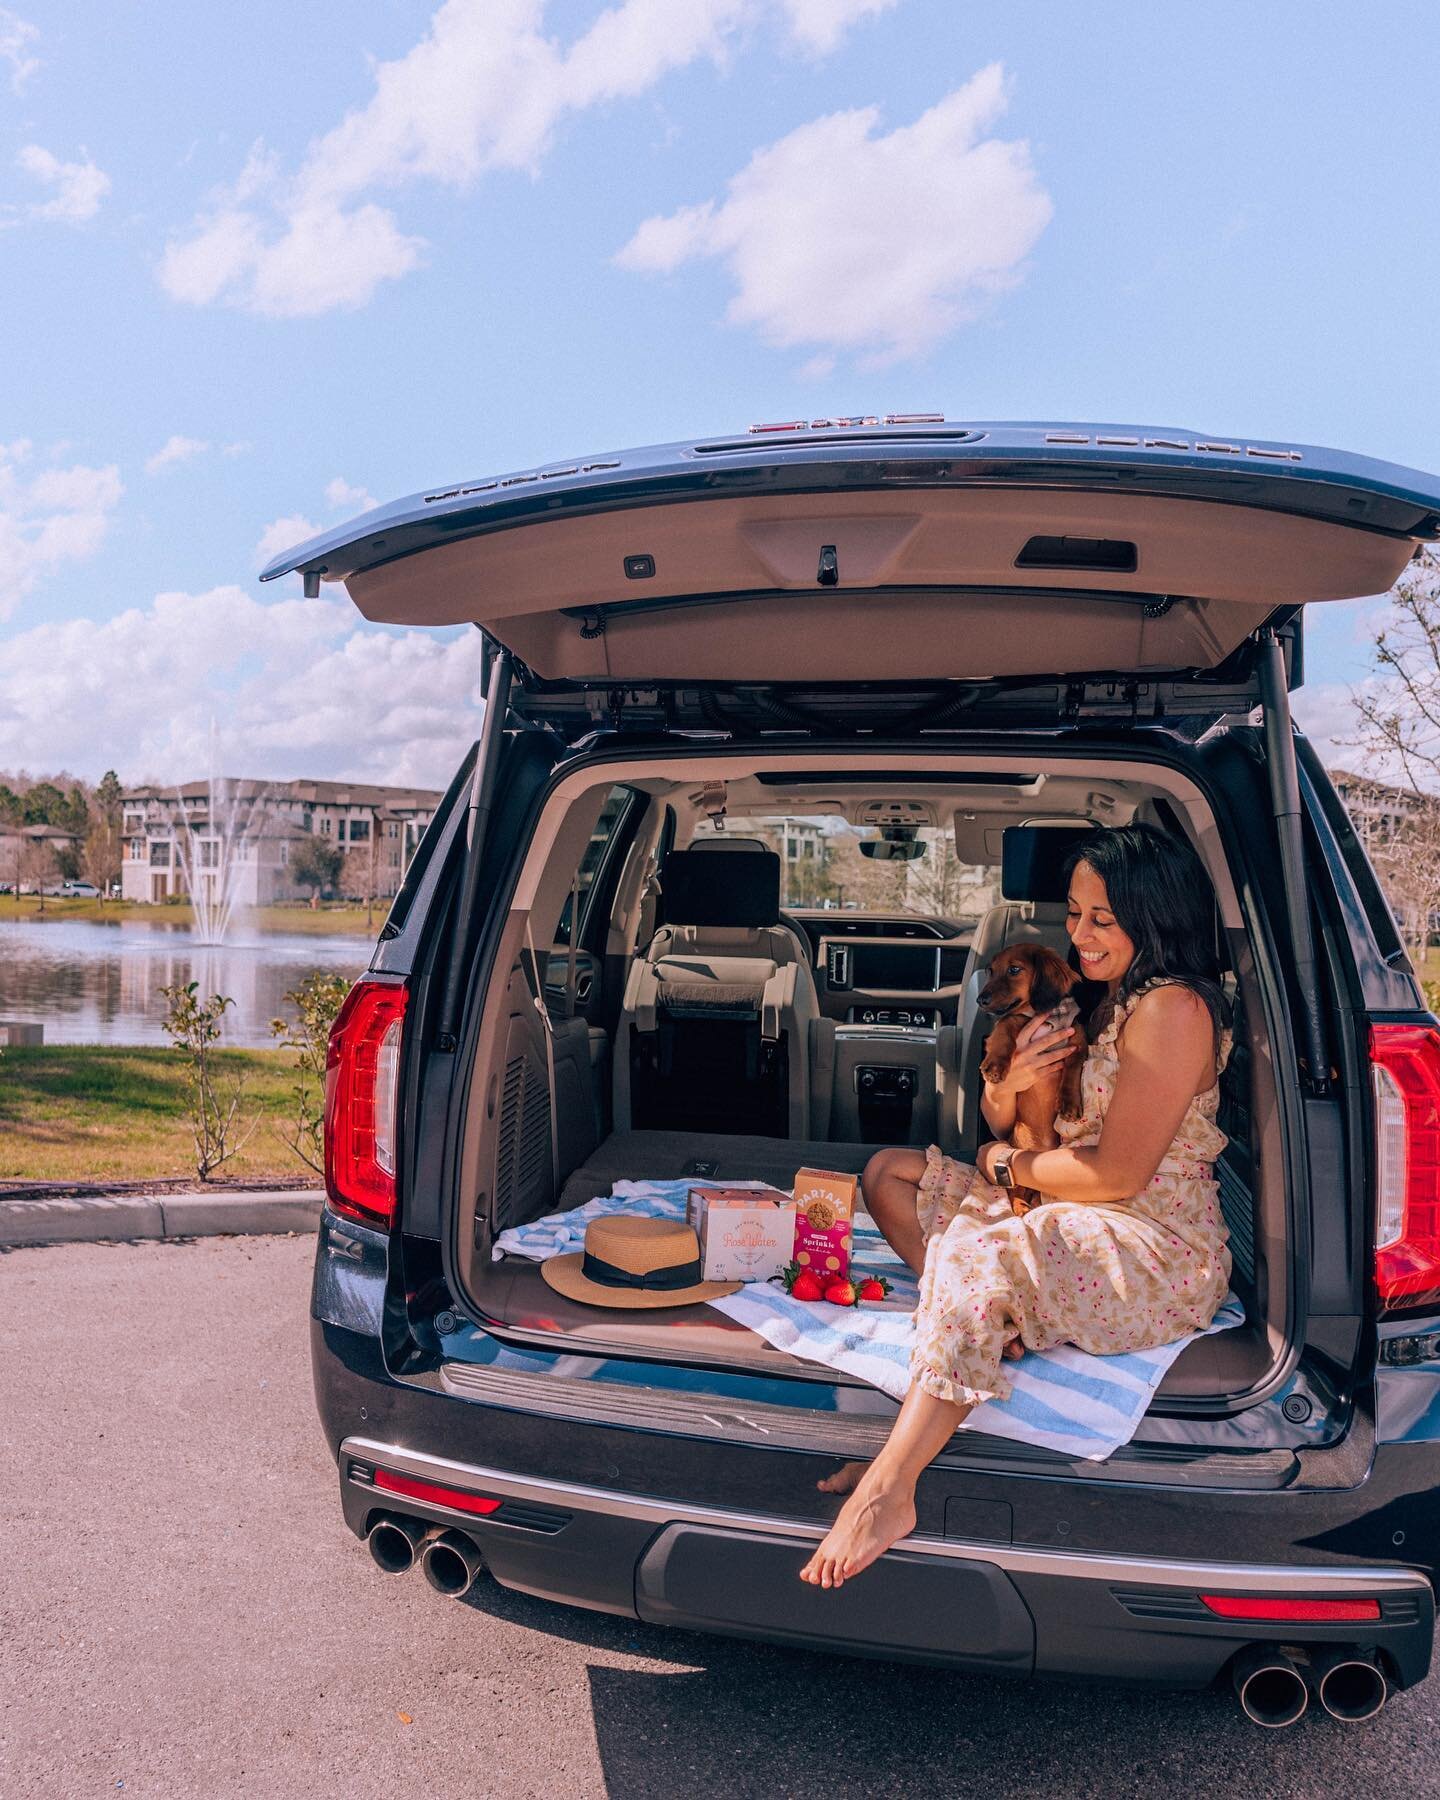 When you rent a car on vacation what do you typically go for?

Not going to lie normally I&rsquo;m all about the cheapest option &ndash; that&rsquo;s usually my mantra for flights and car rentals 😂. But this time I did something totally different. I